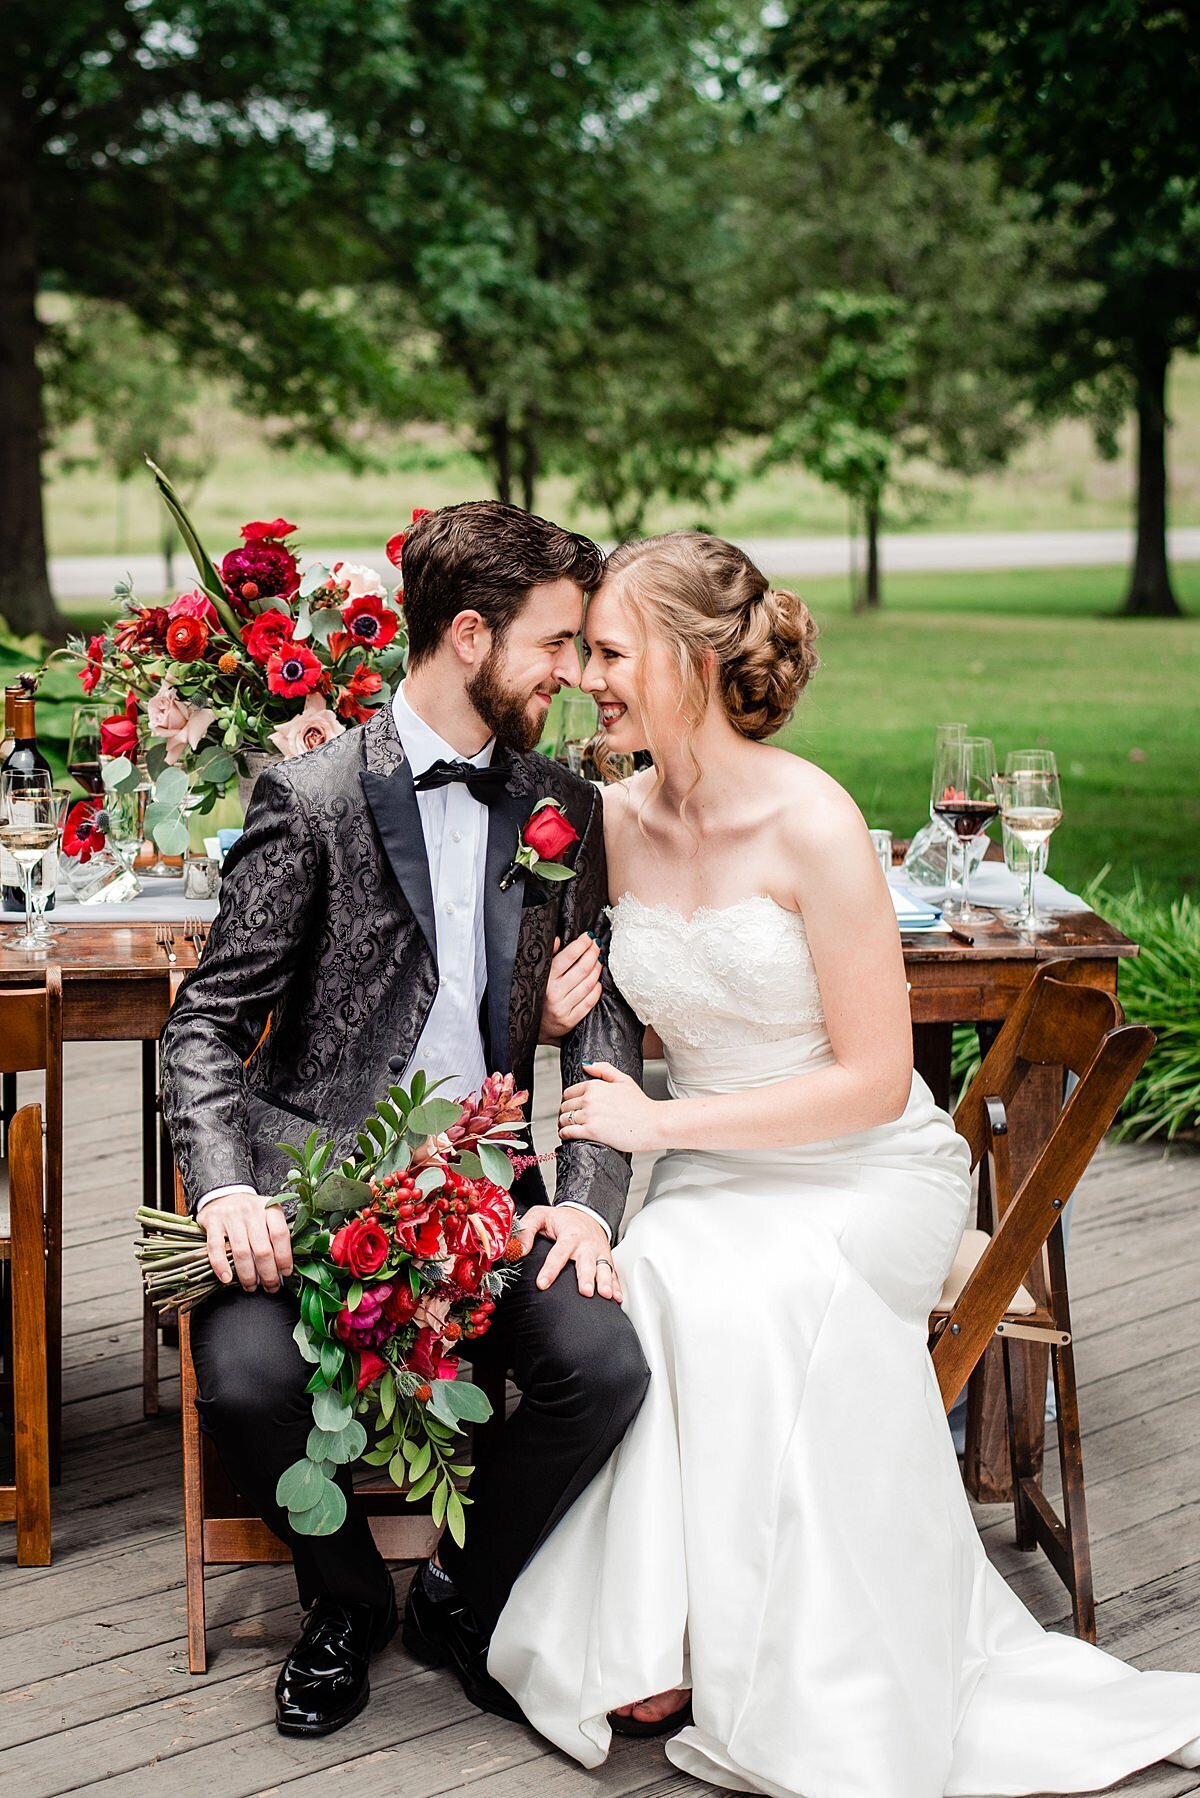 The bride, dressed in a white silk wedding dress and a strapless lace bodice with a  sweetheart neckline embraces the groom who is wearing a black tuxedo with a black silk tuxedo jacket with an embroidered paisley design and red rose boutonniere. The bride and groom, touching foreheads, sit in front of a dark wood farm table  decorated with a large red and blush floral centerpiece. The groom holds the cascading bridal bouquet of red ranunculus, hypericum berries, blush roses, red anthurium, red roses, red ranunculus, red anemones, red proteas, blue thistle, red dianthus and assorted cascading greenery.